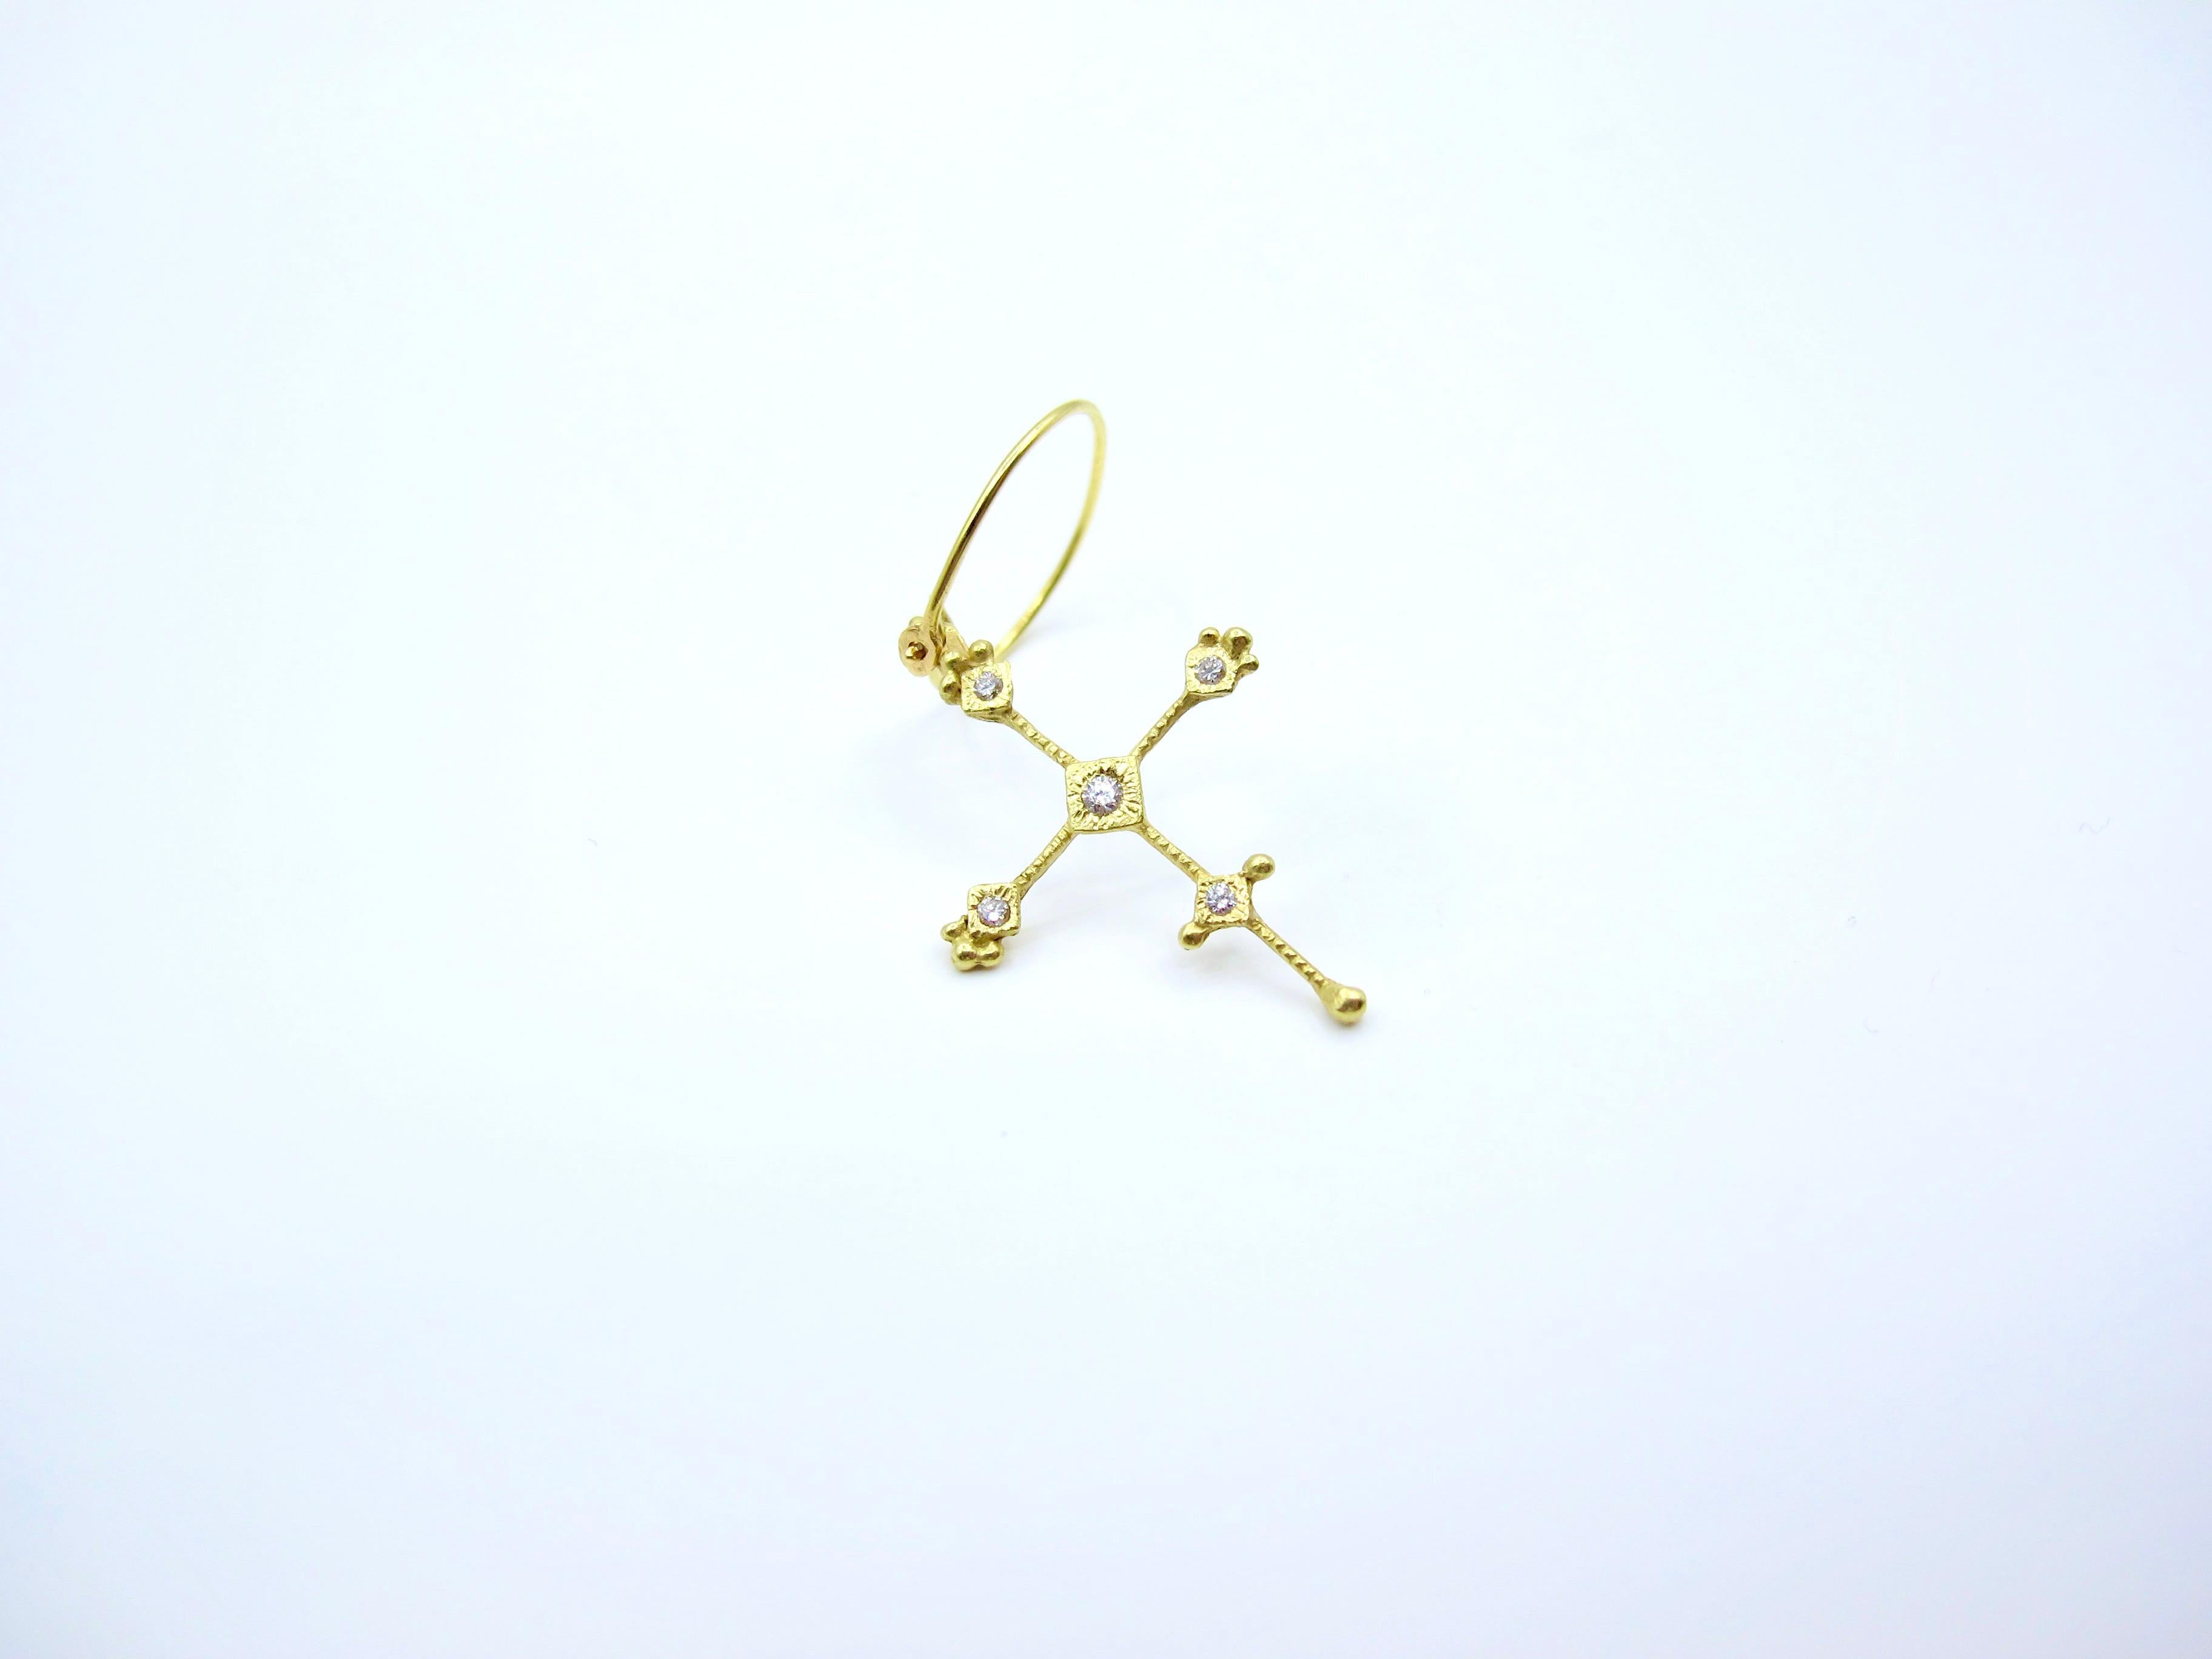 Rima Jewels brings you this popular and impossibly dainty cross. Entirely hand fabricated in Rocío Inès' Manhattan studio she's married an array of design influences and techniques including the colorful Ojo de Dios crosses of the Huichol peoples of